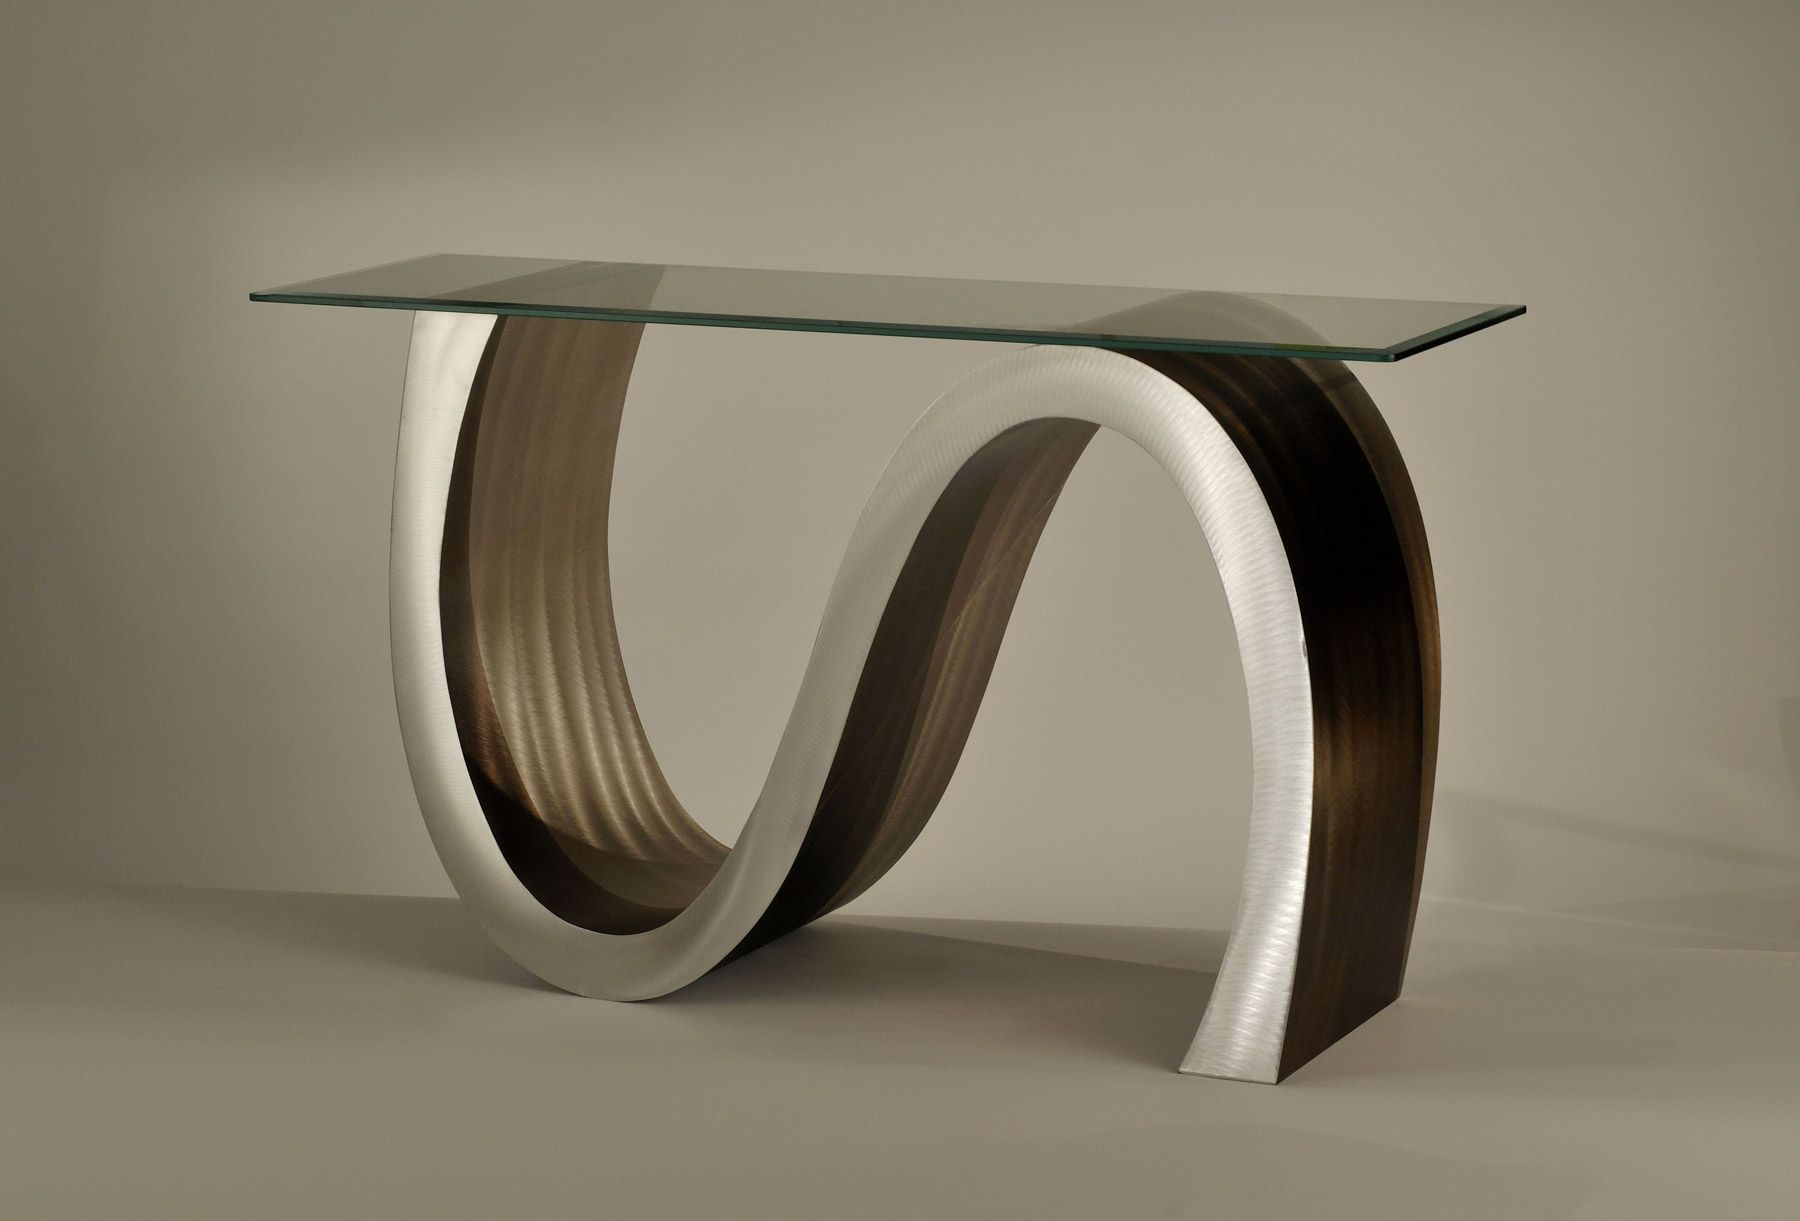 Sofa Table: Appealing Contemporary Sofa Table Design Skinny Console With Parsons Grey Solid Surface Top & Brass Base 48x16 Console Tables (View 9 of 30)